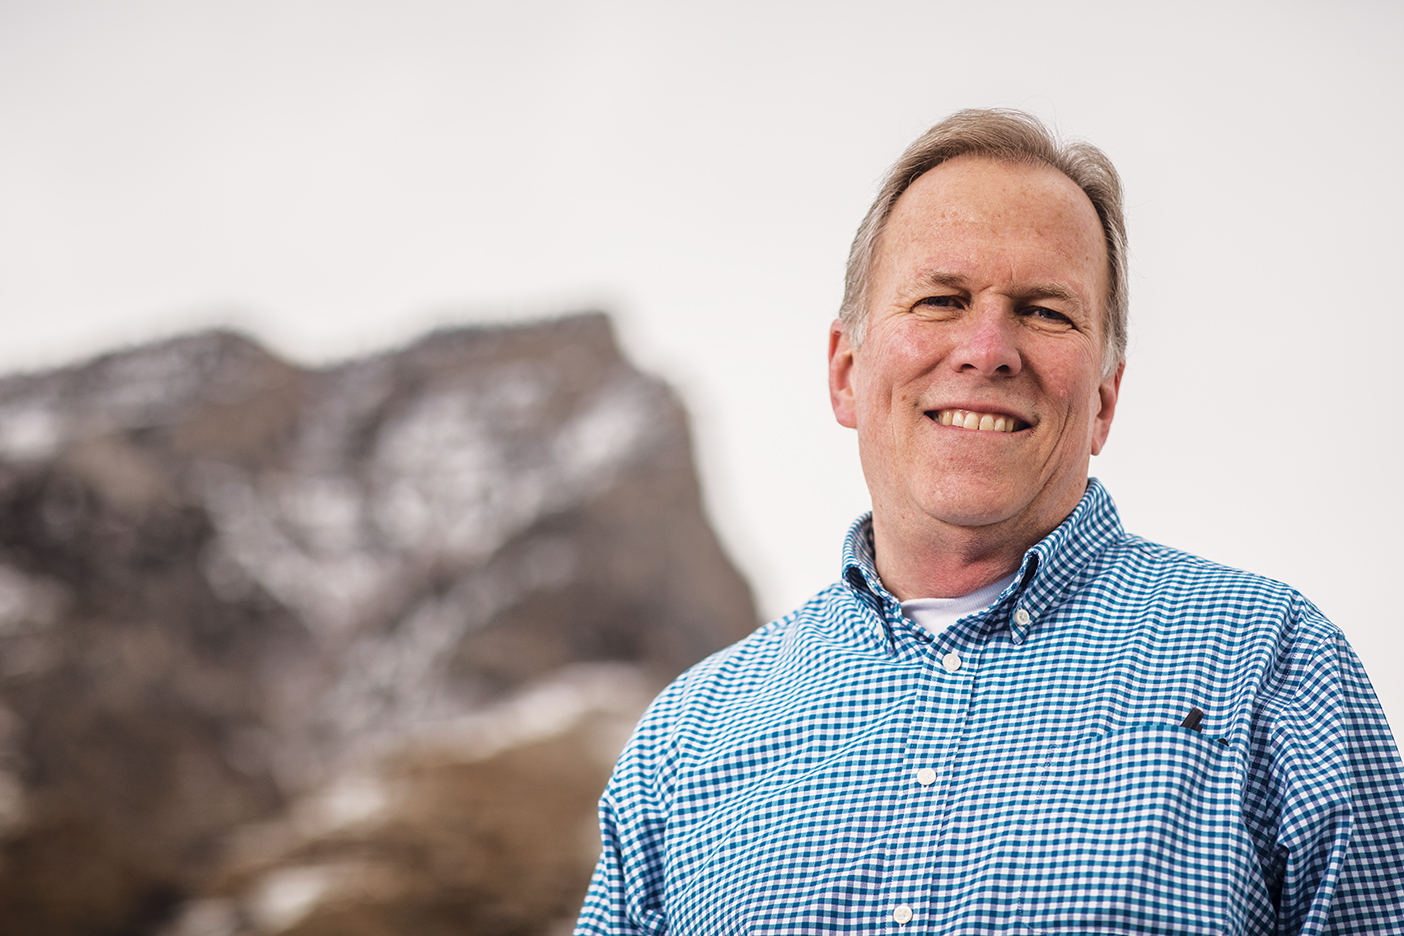 Backed by a mountain peak, BYU grad Joseph Johnston stands and smiles.